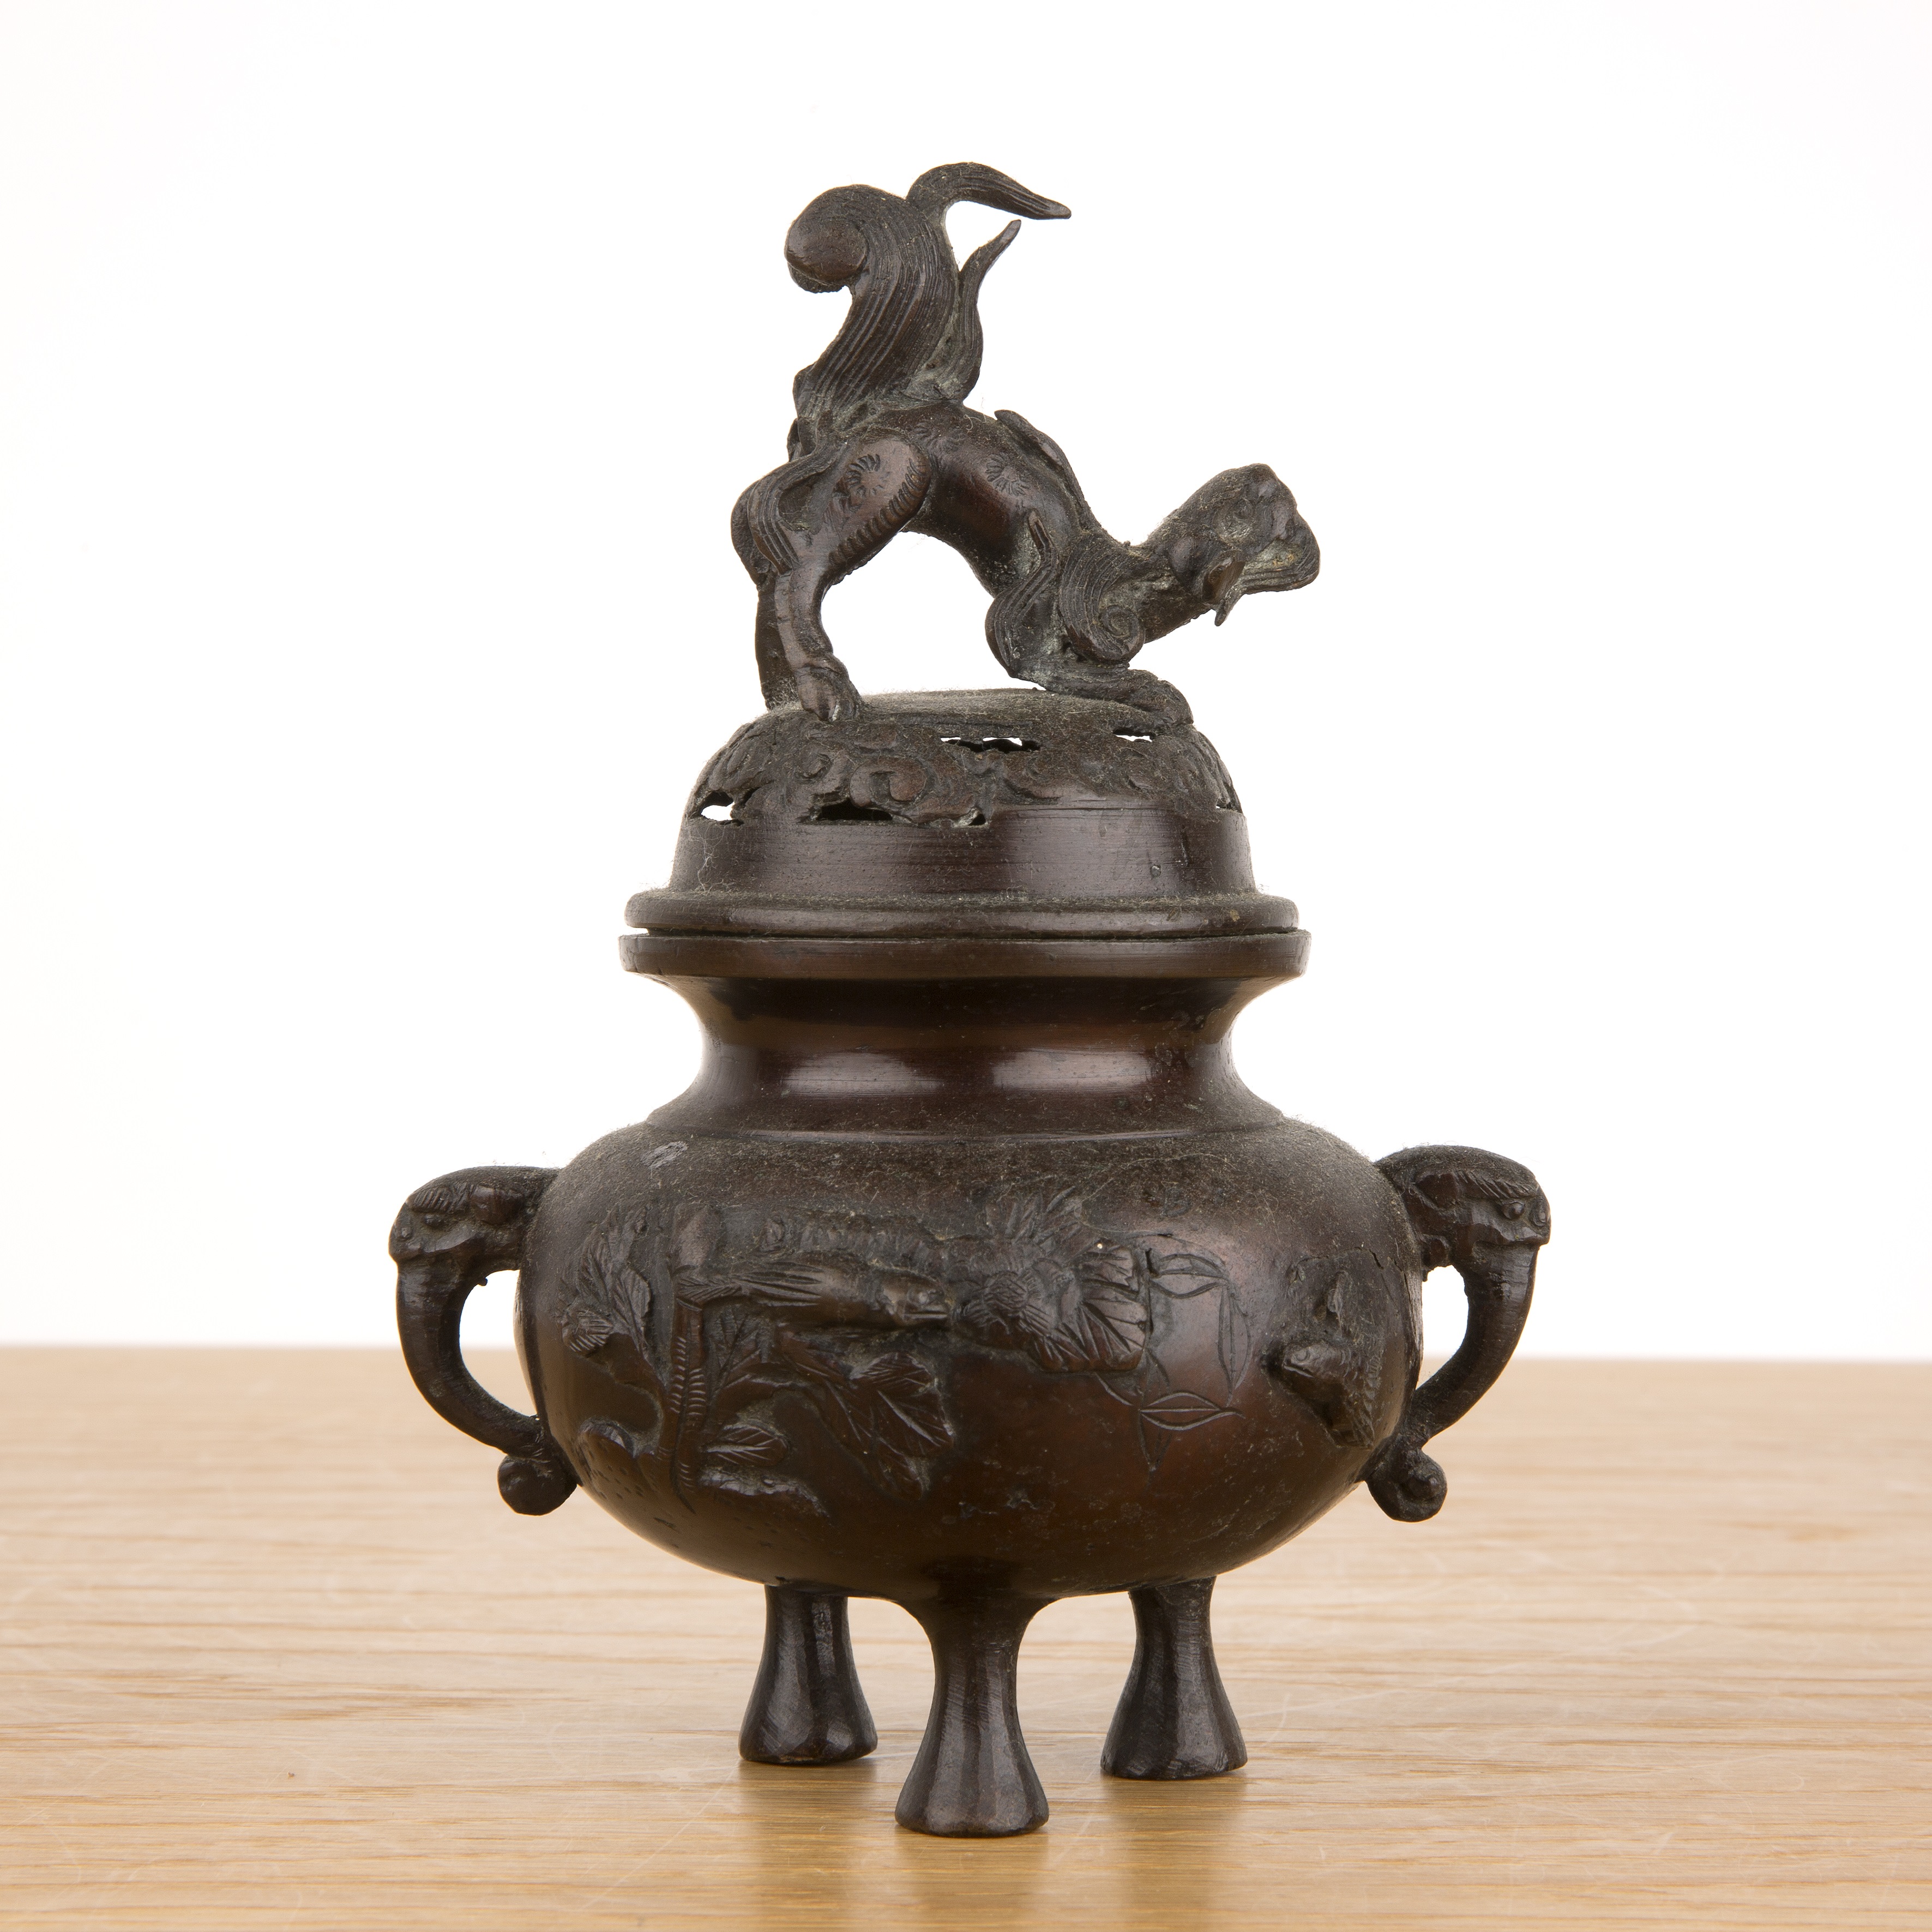 Small bronze censer Japanese with a kylin finial, 17cm high With some marks and wear.